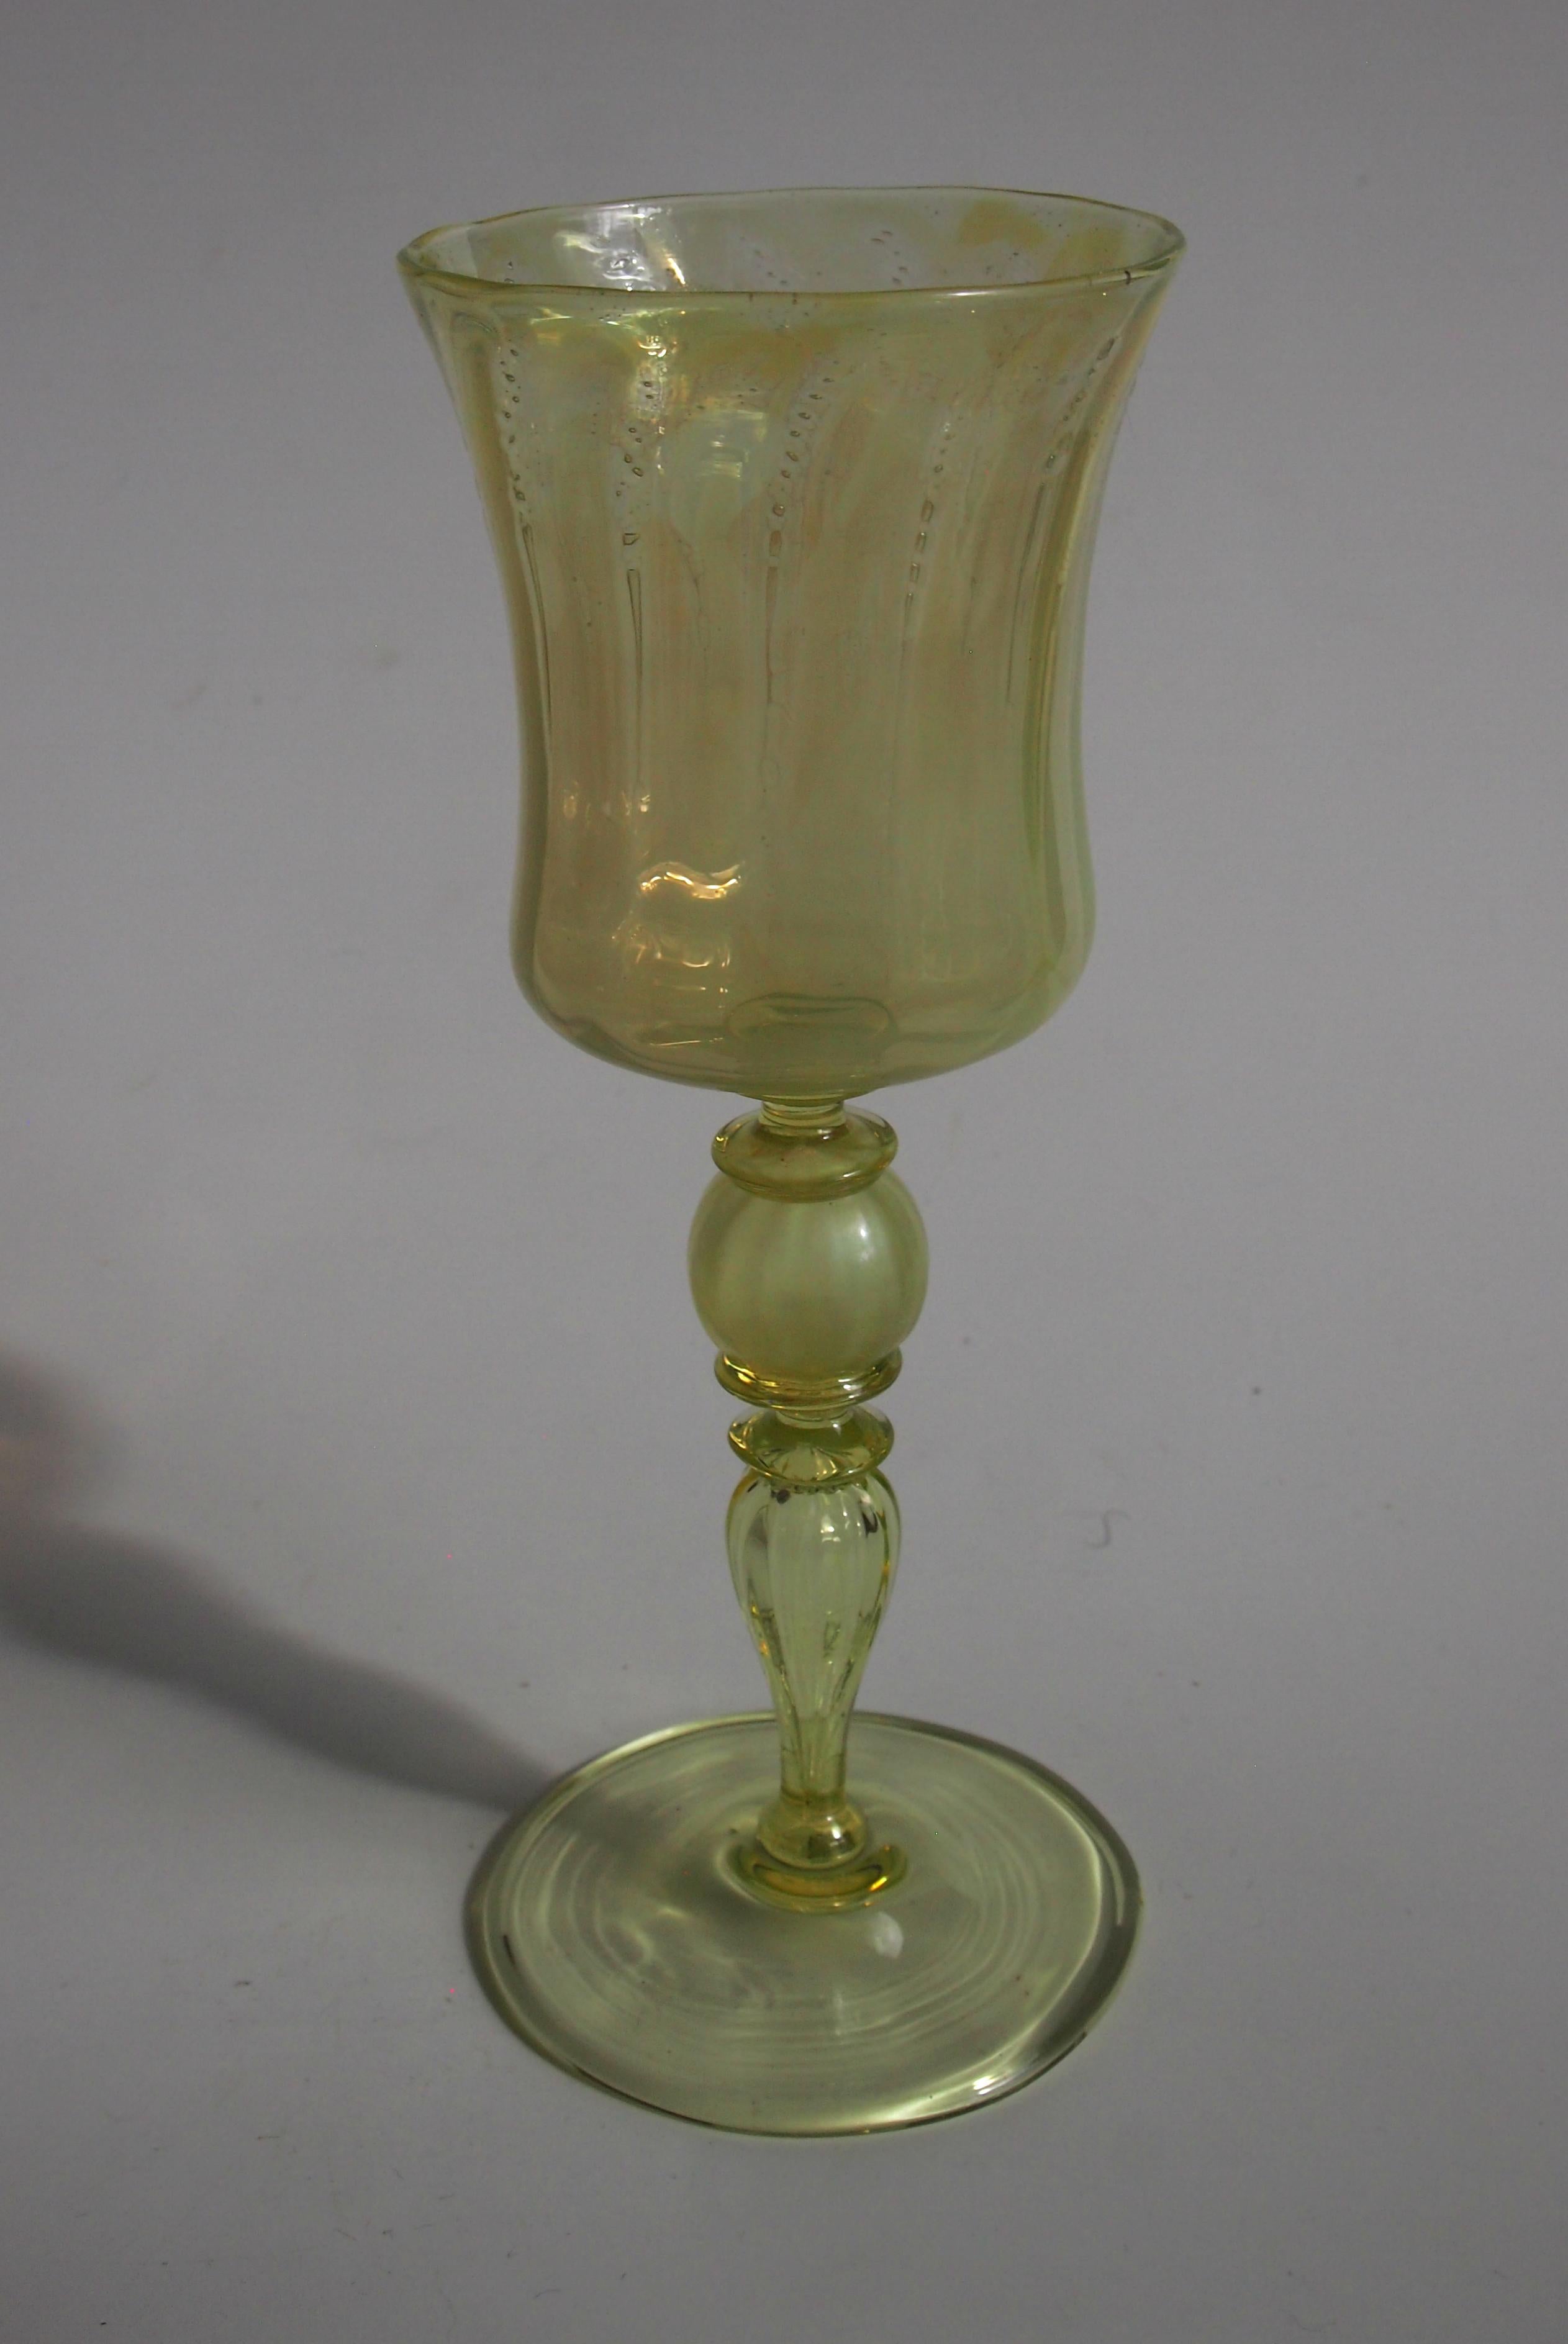 A very rare and important straw opal -pastel Louis Comfort Tiffany Favrile large wine glass. Beautifully signed 'L. C. Tiffany Favrile' -on the base at the tip of the stem See picture 6. Its rare to find such beautiful opalescence in Tiffany's work.